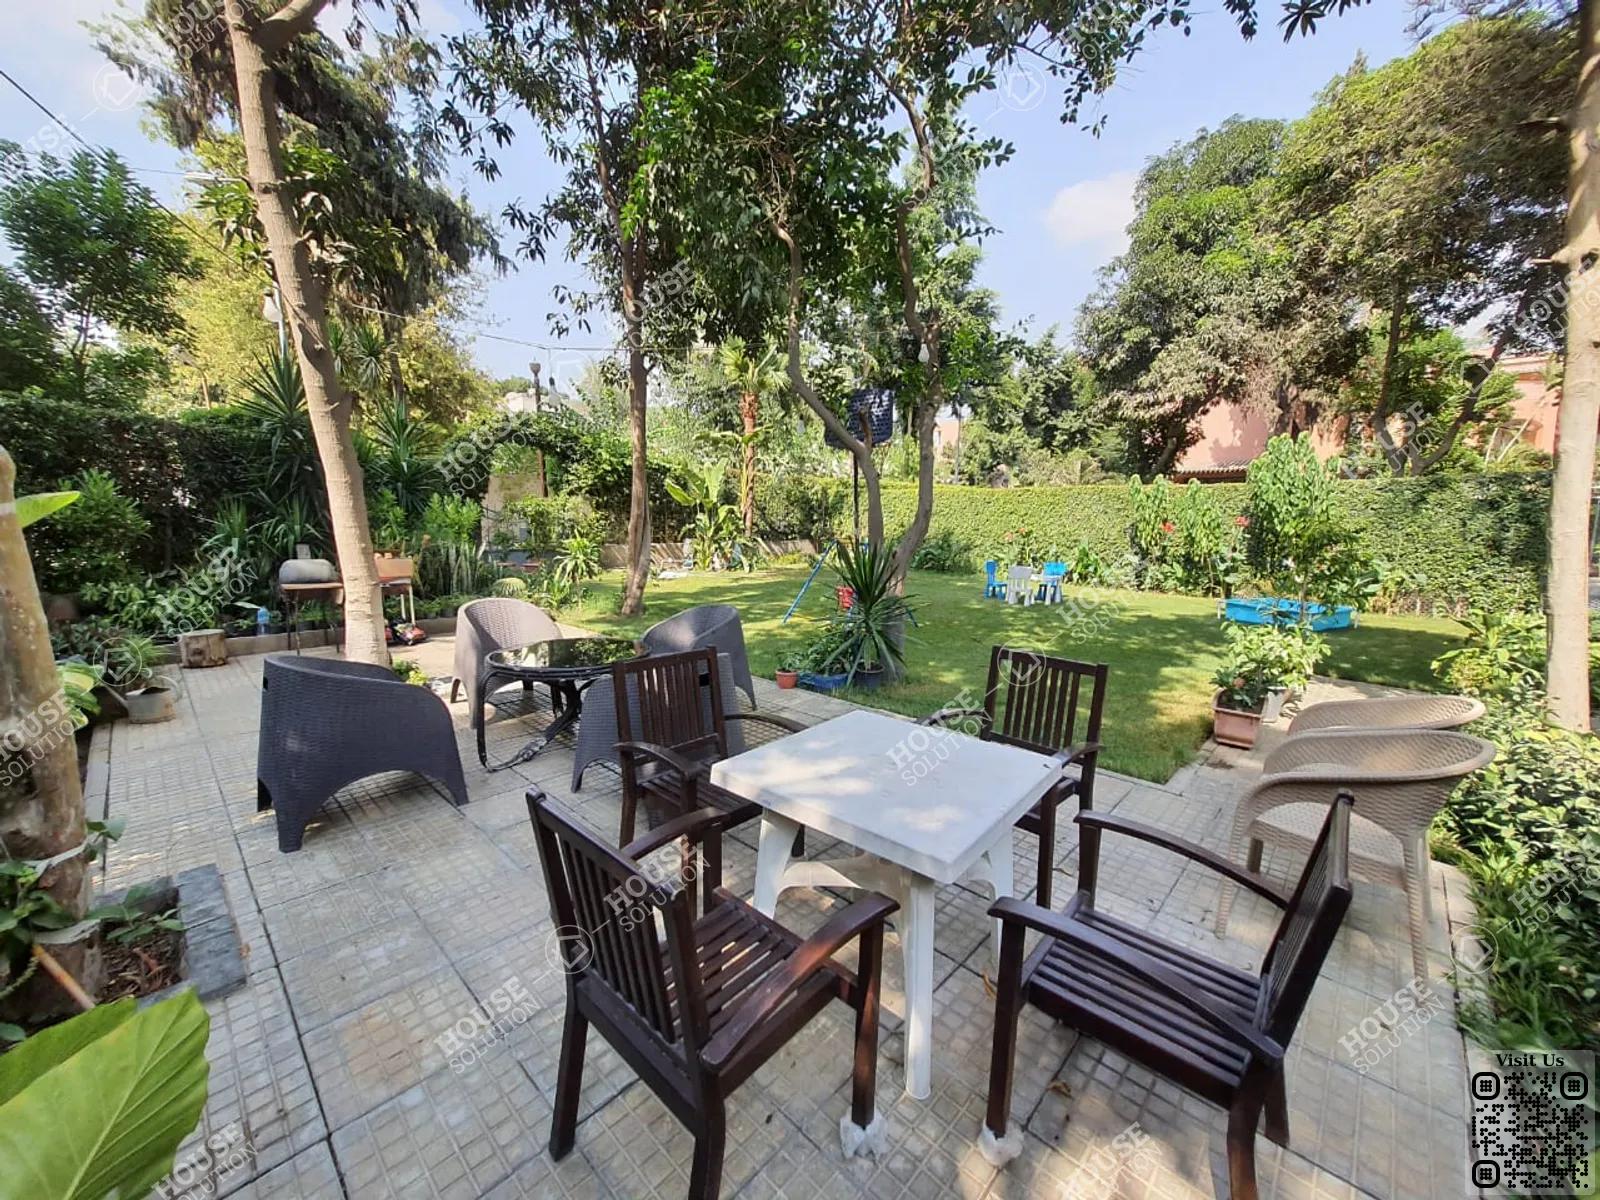 SHARED GARDEN  @ Apartments For Rent In Maadi Maadi Degla Area: 250 m² consists of 3 Bedrooms 3 Bathrooms Modern furnished 5 stars #5570-1